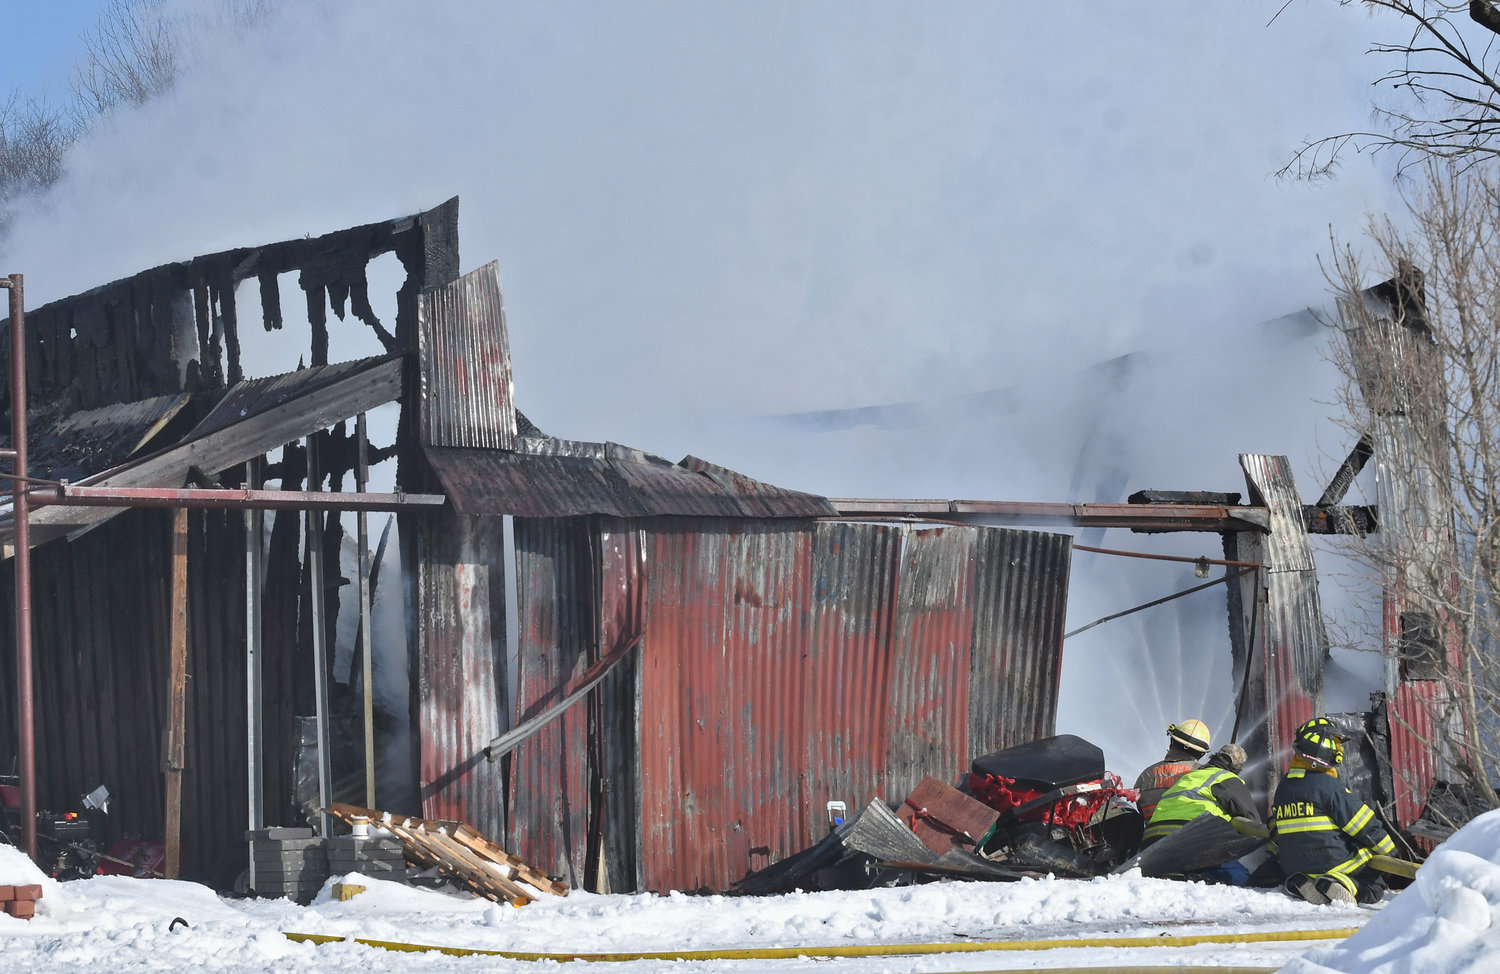 Volunteer firefighters from Florence and Camden blast water into a barn fire at the corner of Thompson Corners-Florence and River roads Wednesday afternoon. The alarm was raised at 1:10 p.m. for a fully involved barn fire, and officials said it was under control by 1:50 p.m. The barn was heavily damaged. The cause remains under investigation. The Florence, Camden and Taberg fire departments responded.